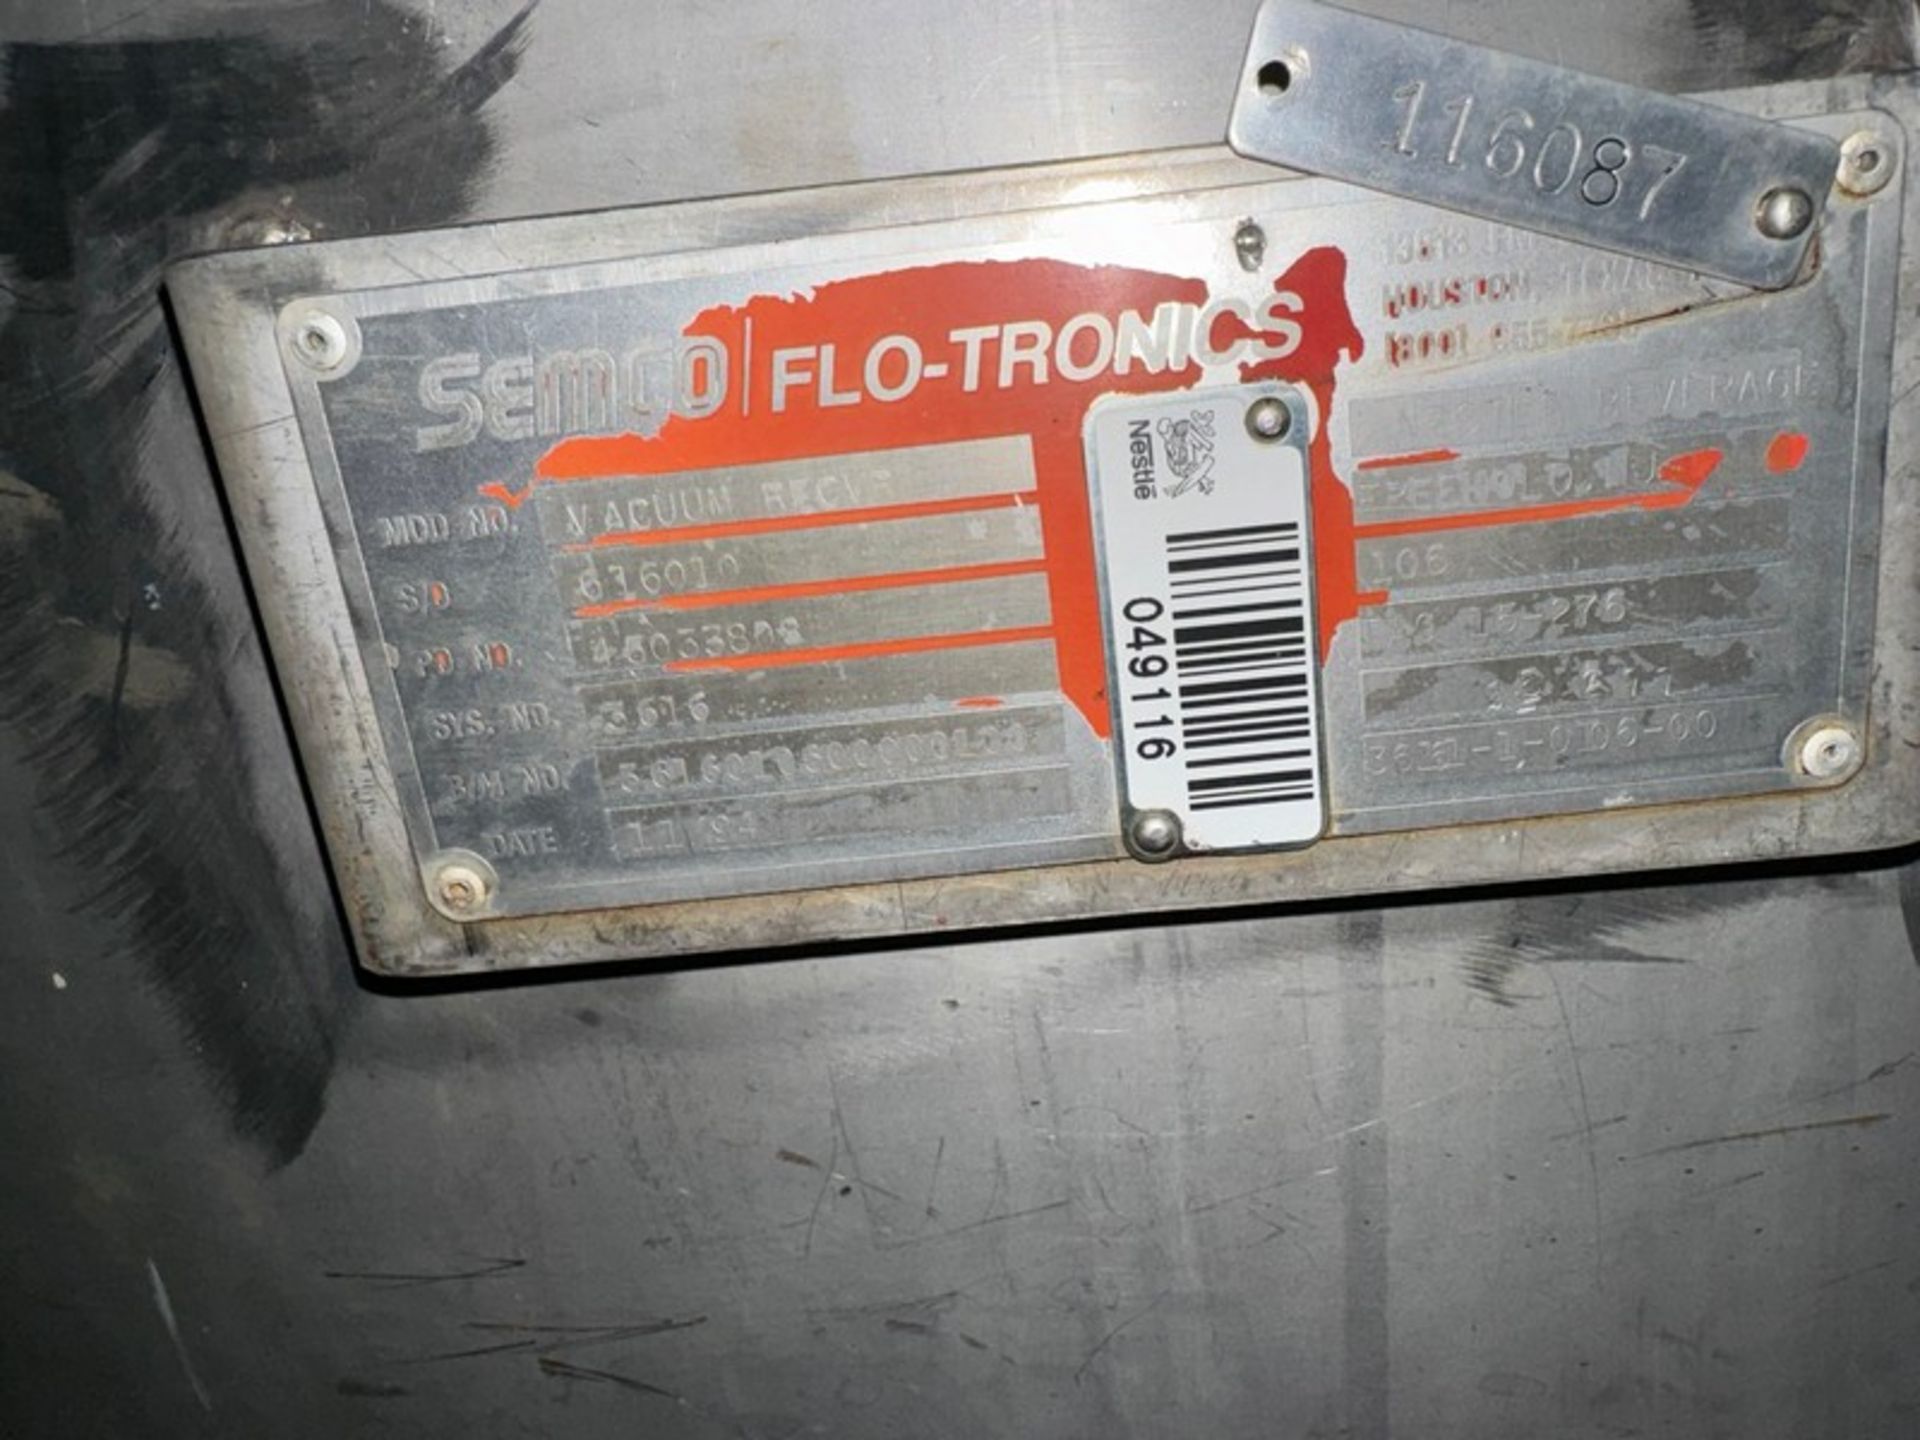 Semco Flo-Tronics S/S Vacuum Receiver, S/N 616010, System No. 3616 (N: 049116) (LOCATED IN FREEHOLD, - Image 6 of 6